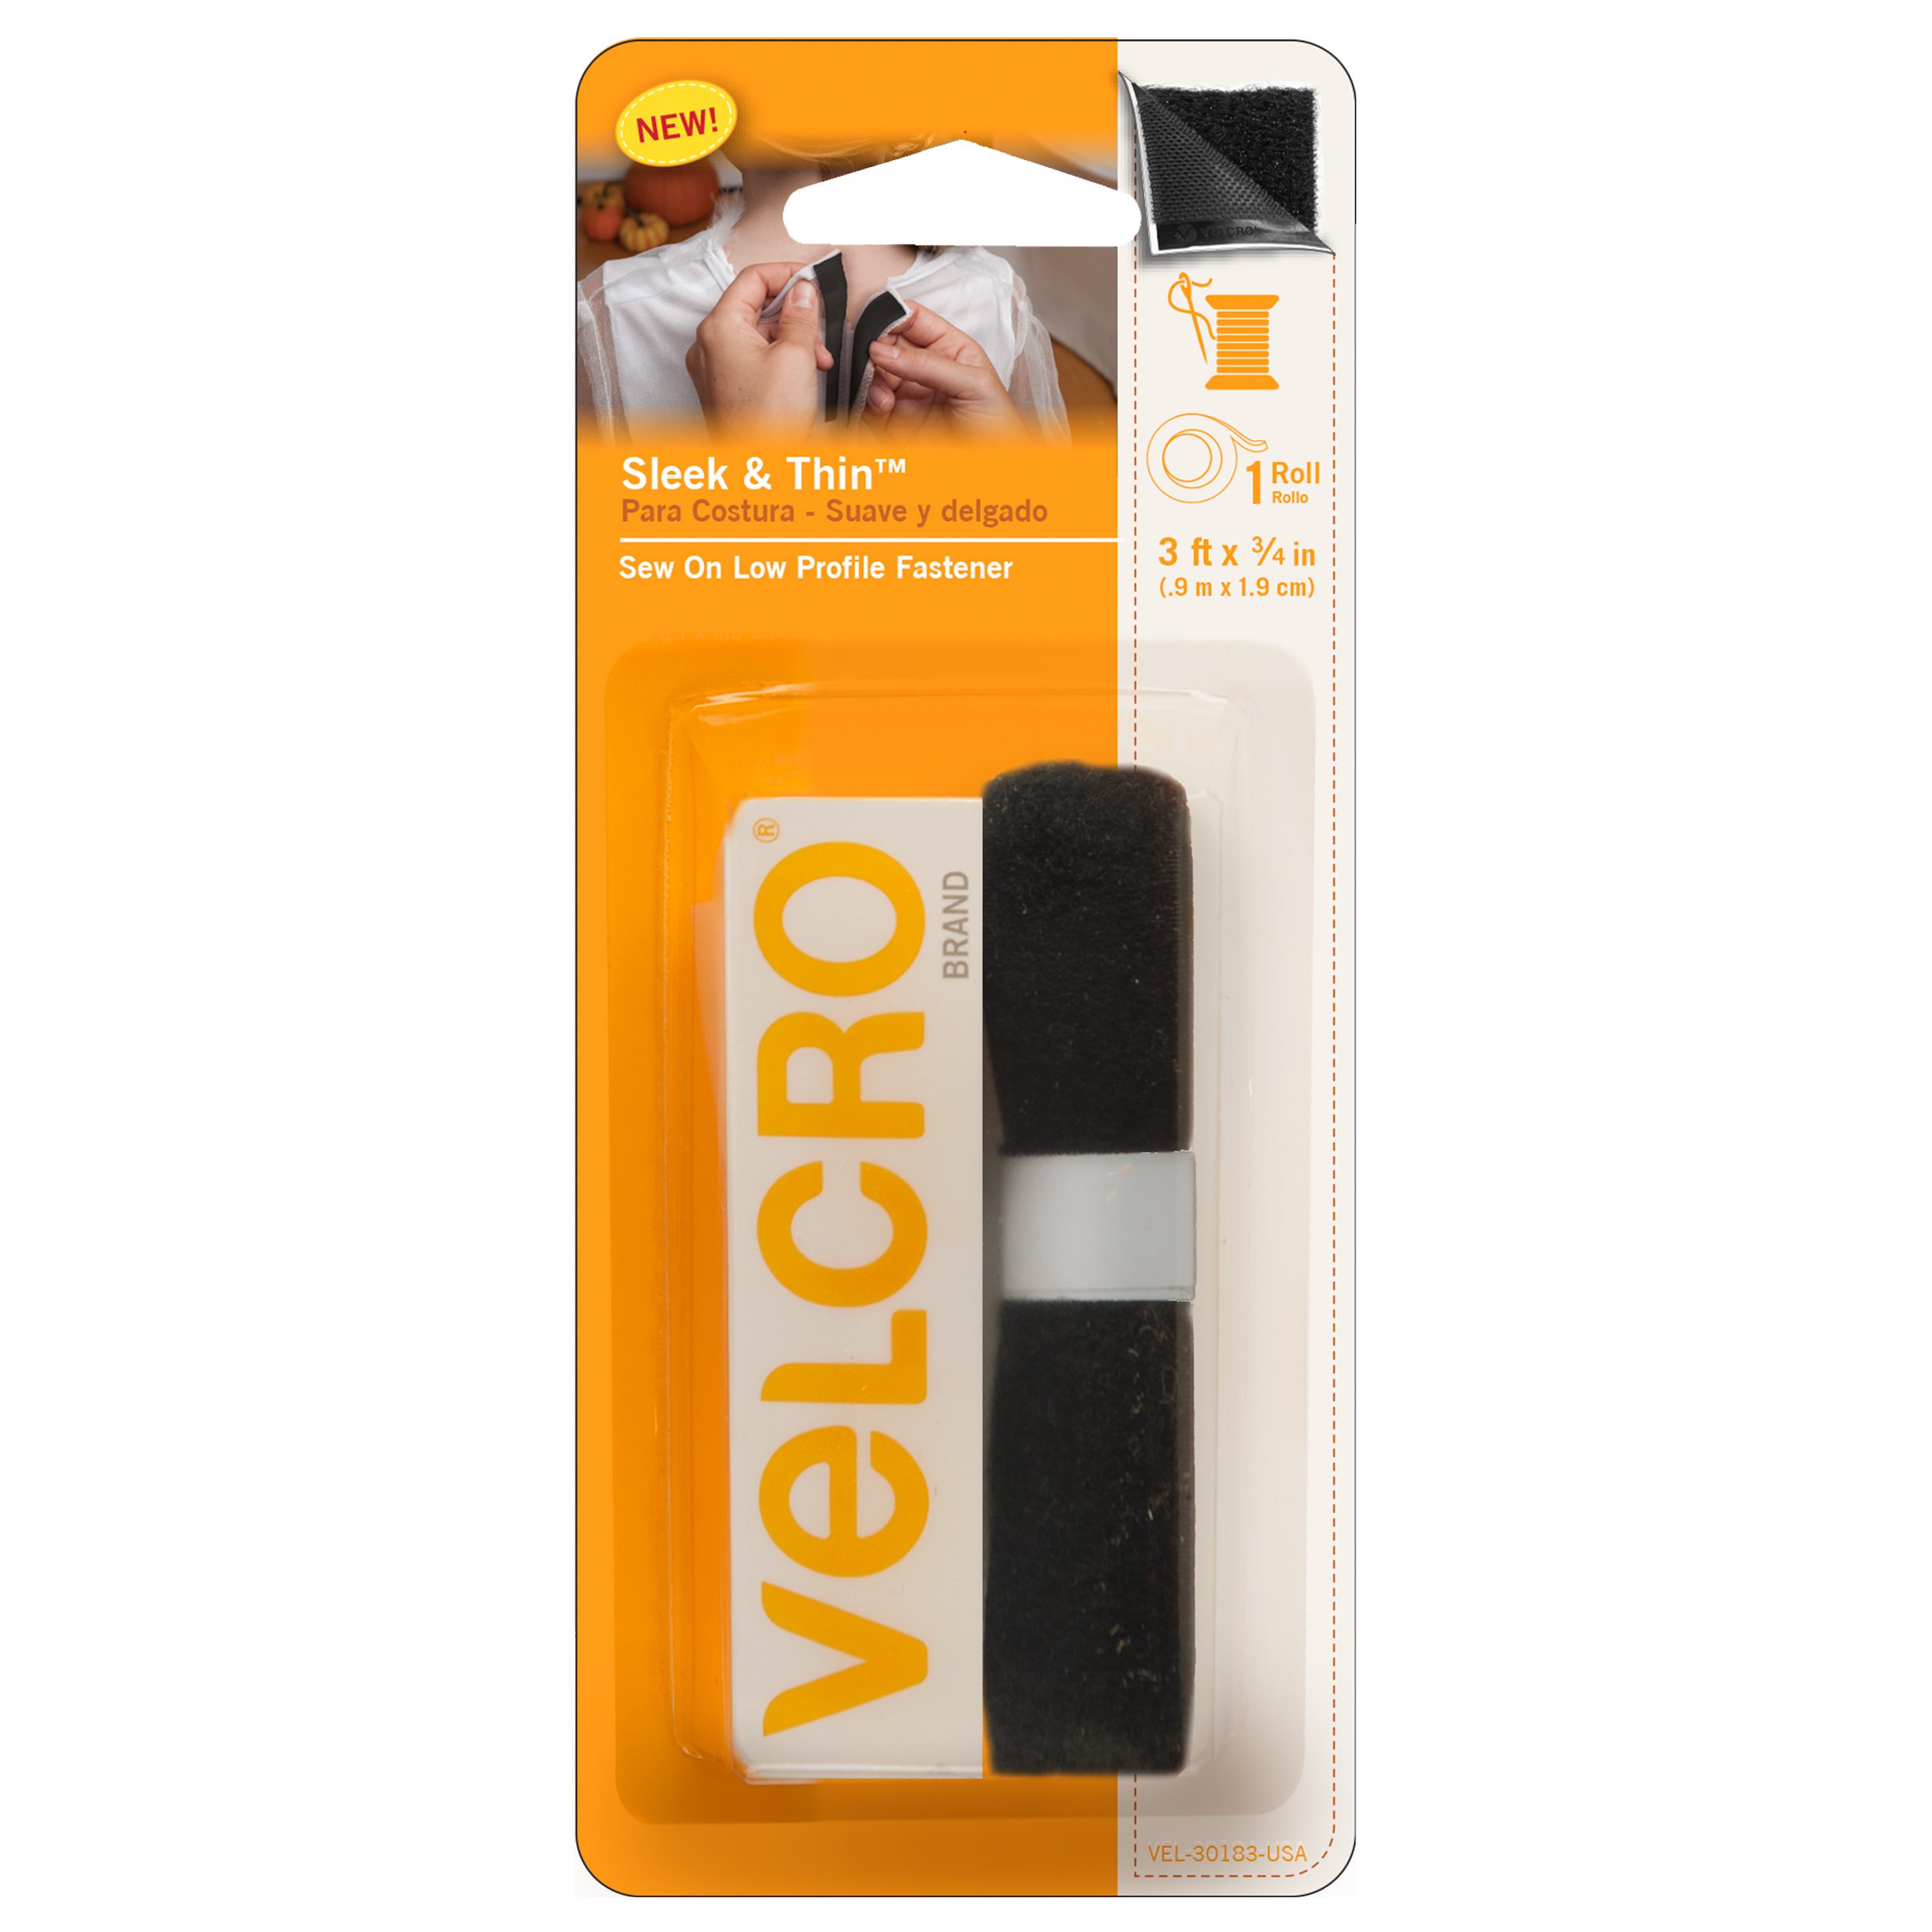 VELCRO® Brand Sewing Fasteners